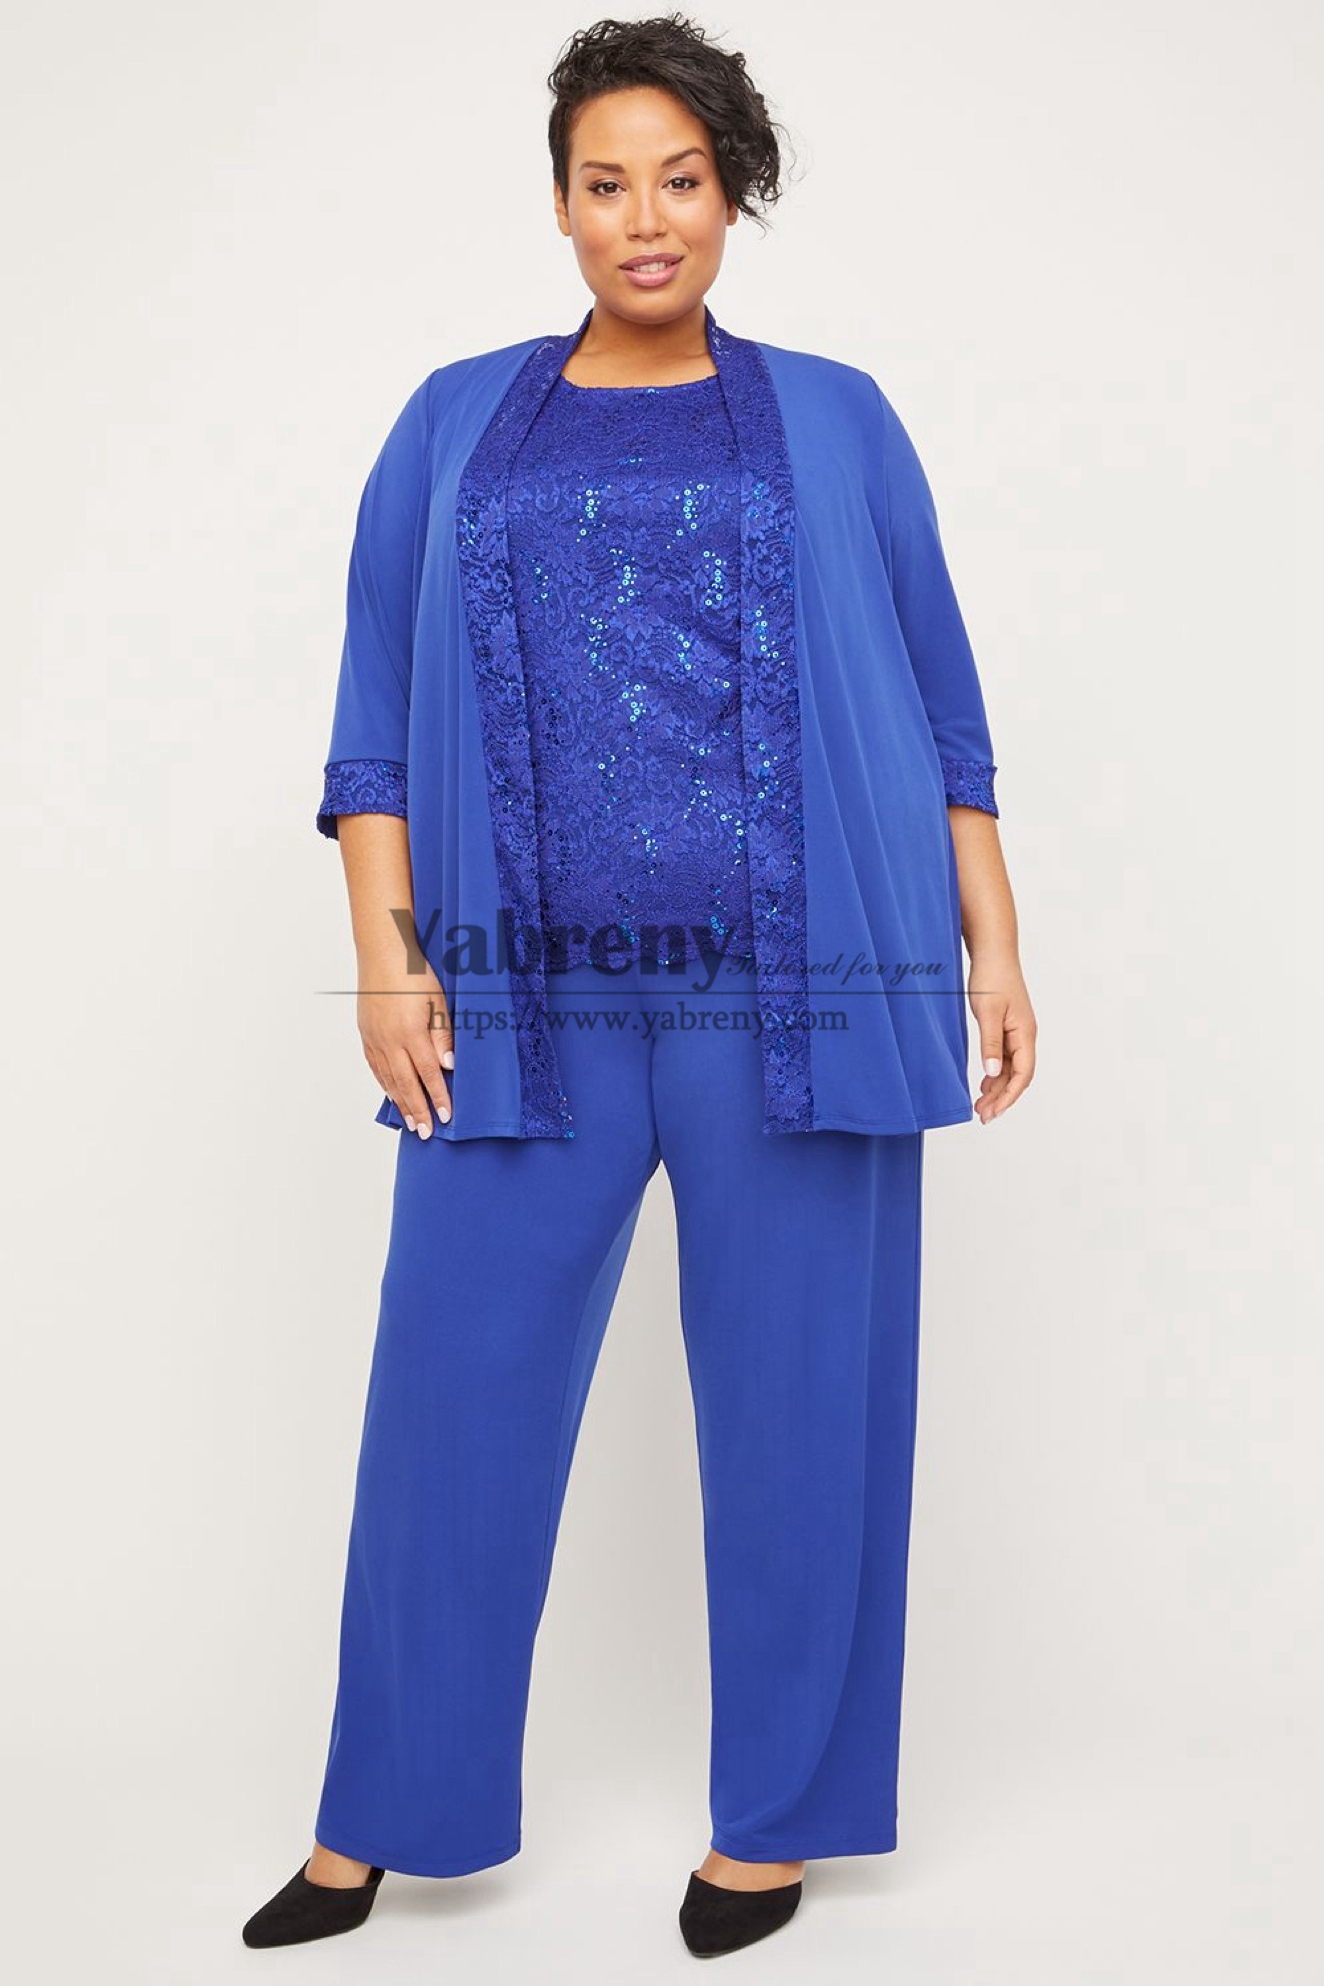 Plus Size Mother of the Bride Pant Suits with Jacket Grandmother ...